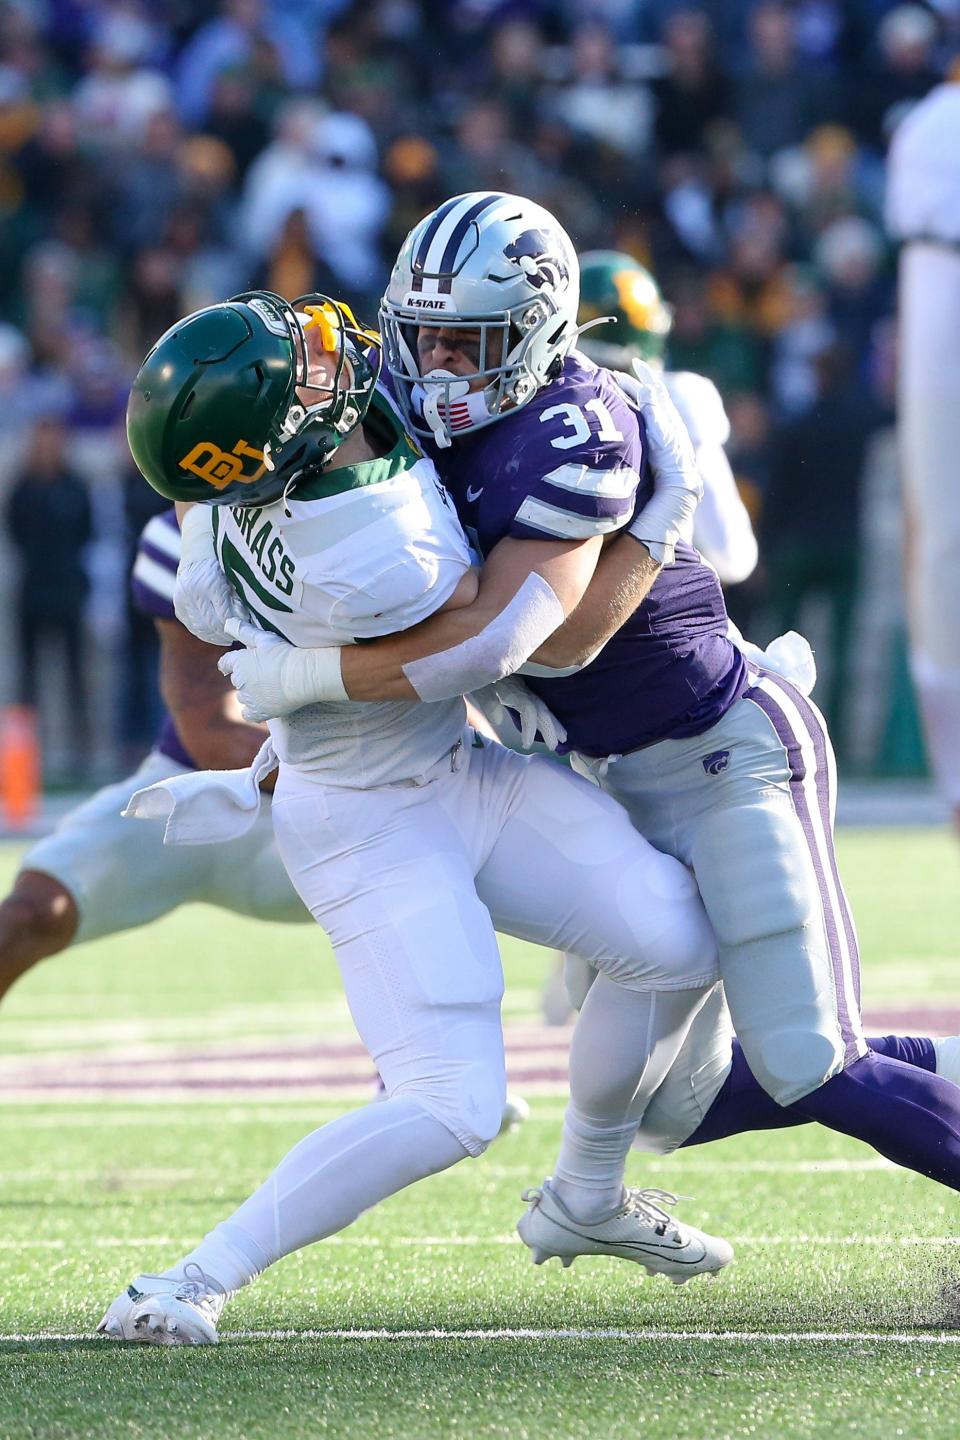 Kansas State linebacker Jake Clifton (31) hits Baylor's Dawson Pendergrass (35) on an incomplete pass last Saturday at Bill Snyder Family Stadium.